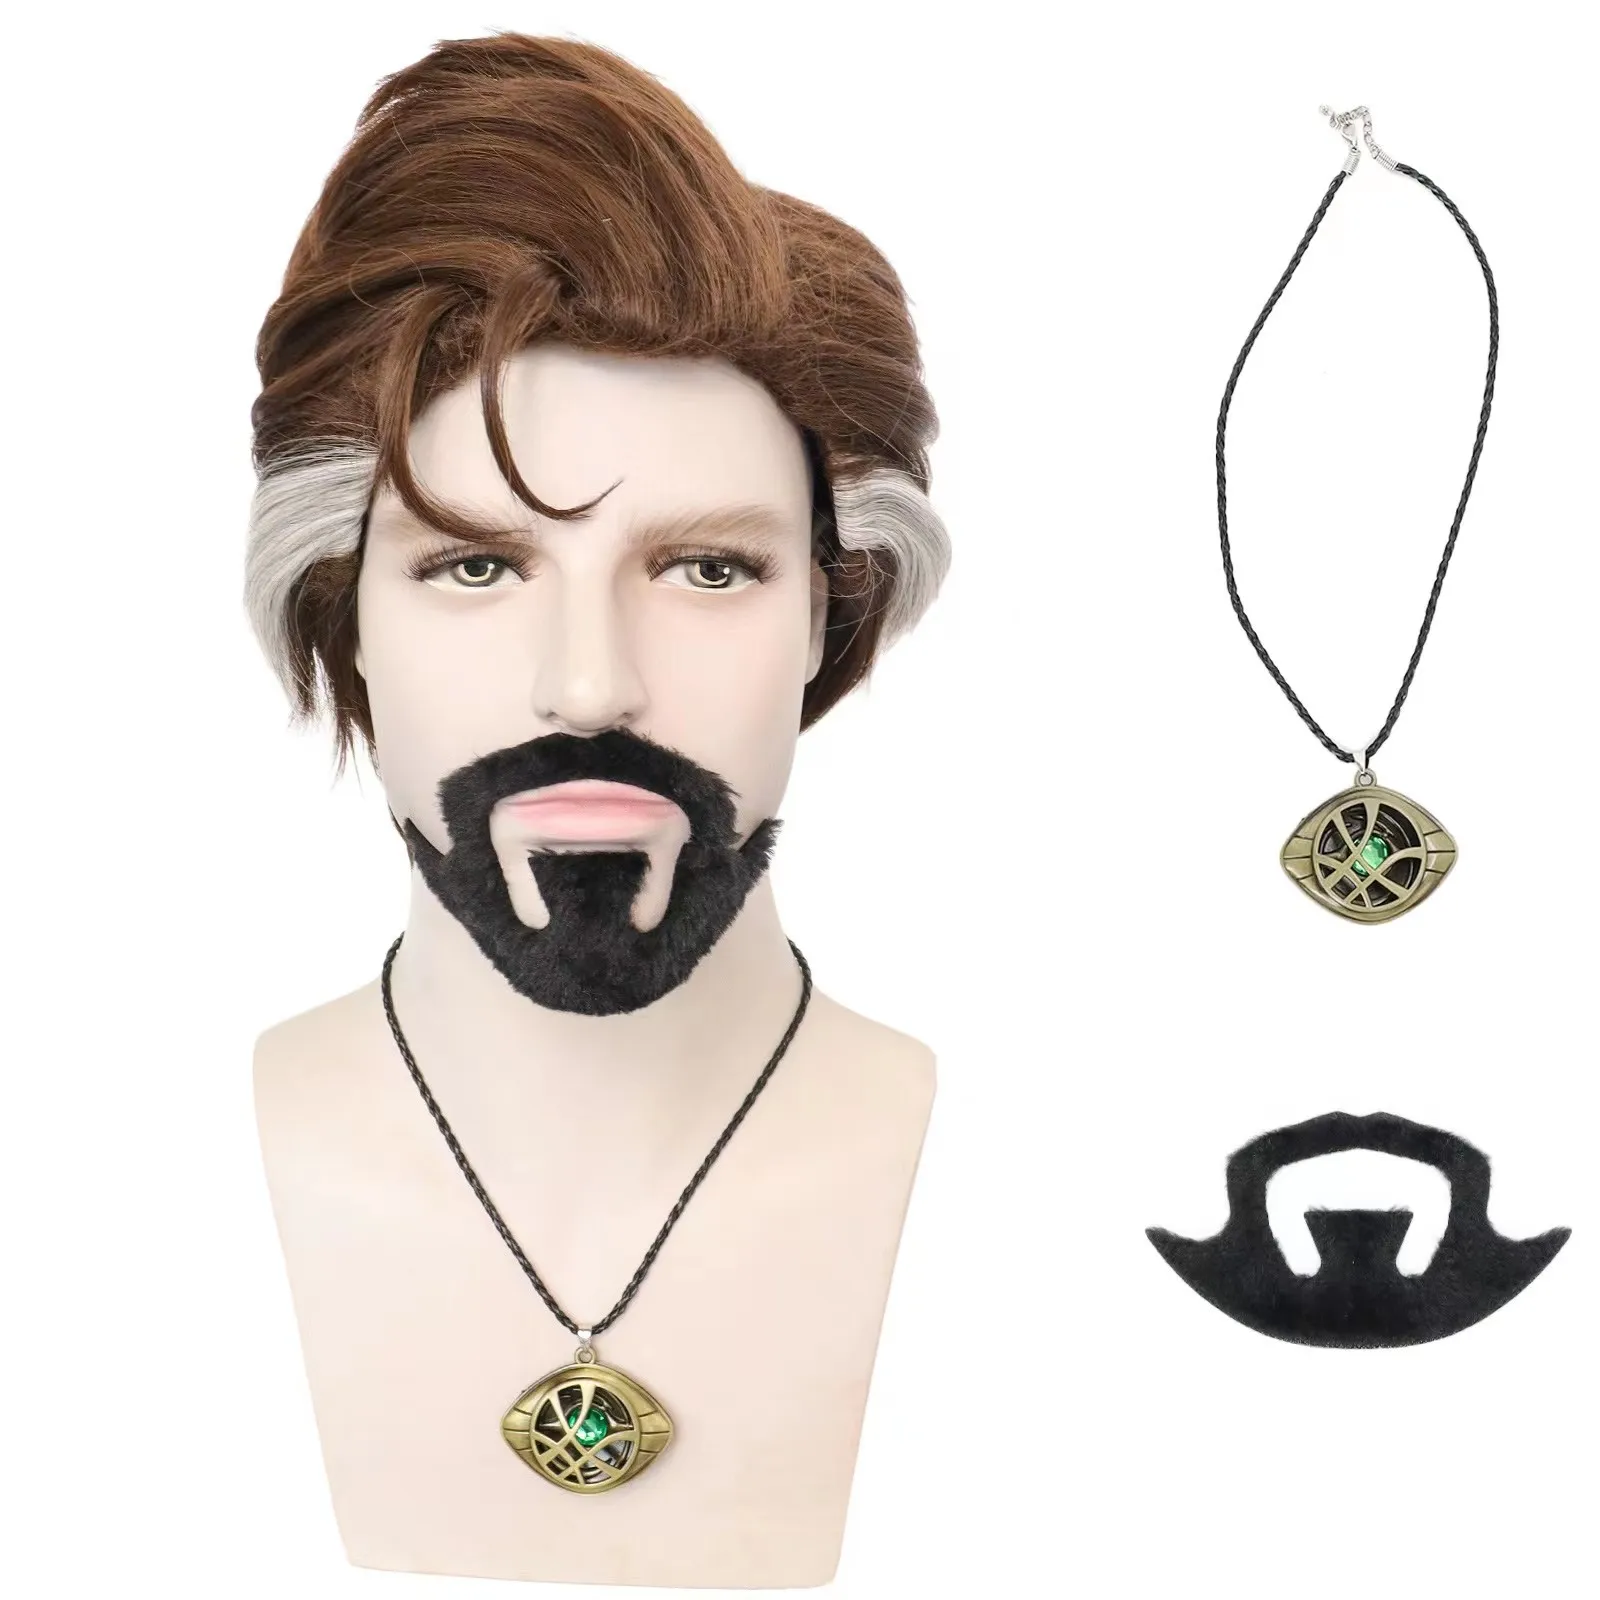 3PCS Set Doctor Strange Wig Comic-con Cosplay Wig Dr. Stephen Strange Wig Costumes With Beard Benedict Role Play For Men Women